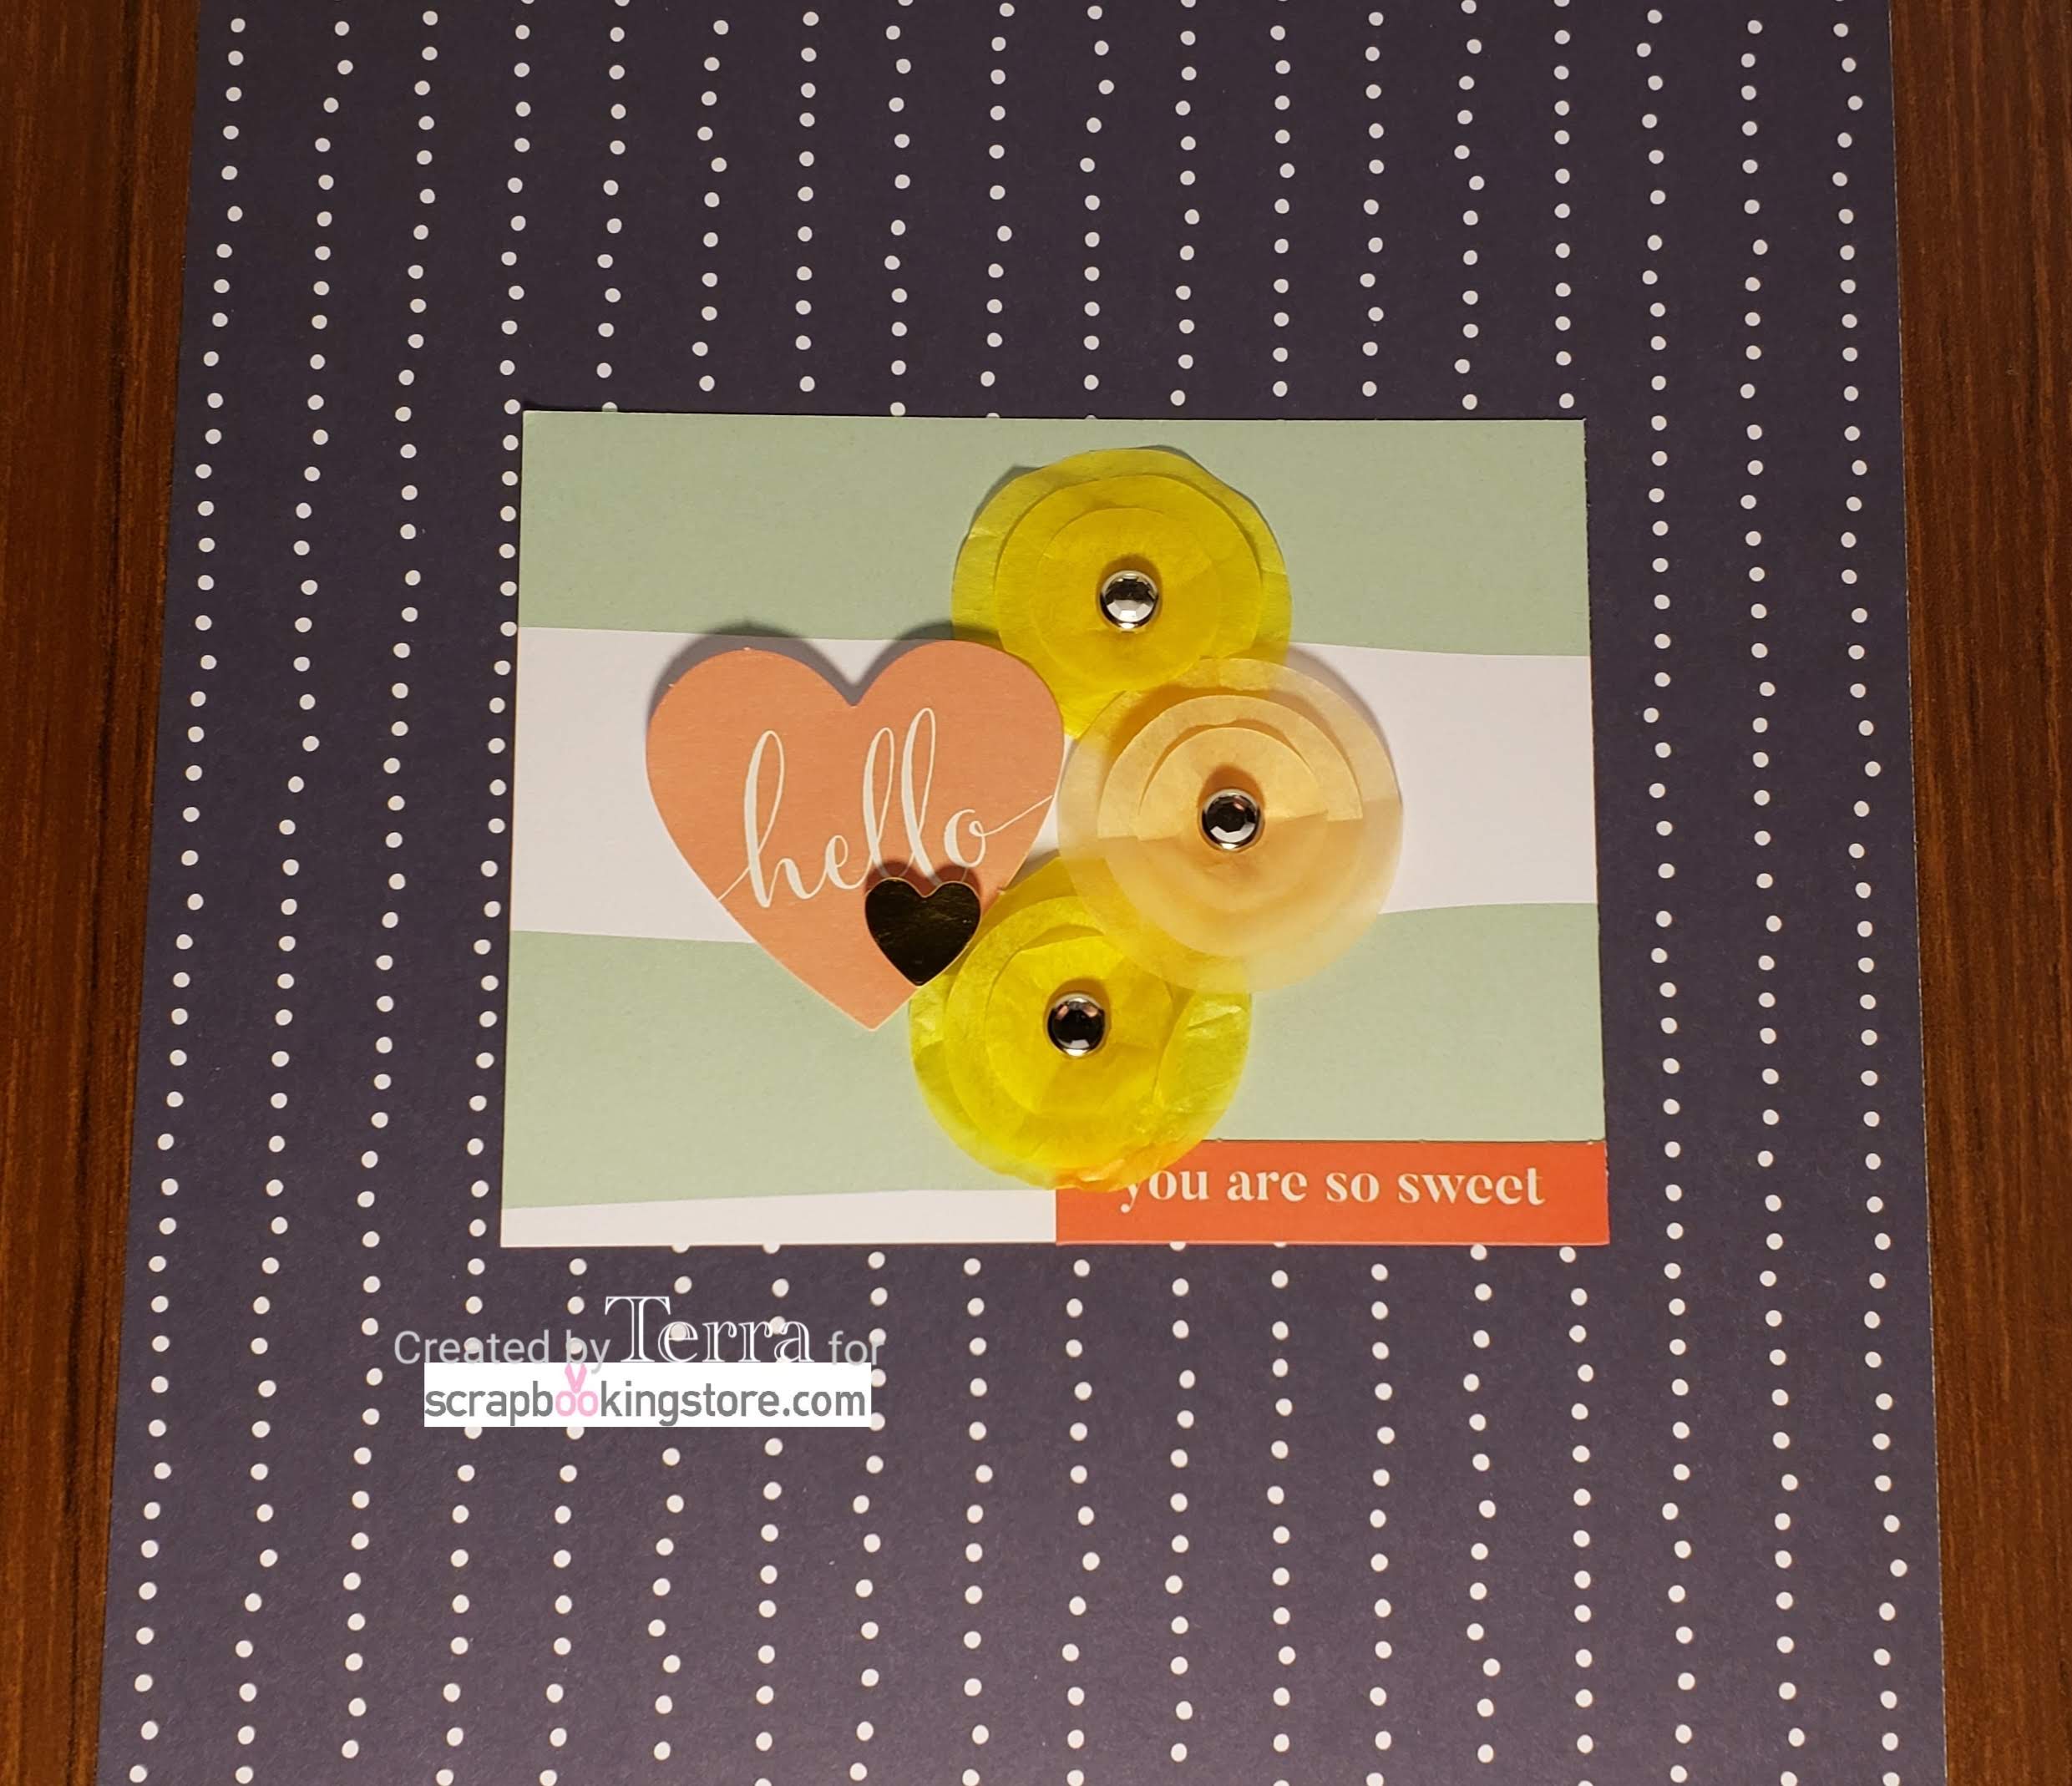 ScrapbookingStore May 2019 kit - Our Design Team members used all crafting materials from our May 2019 monthly kit called "Happy Days" collection by My Mind’s Eye, which also includes Dear Lizzy “Oh Hello” from the Lovely Day collection and Maggie Holmes “Summertime” from the Carousel collection